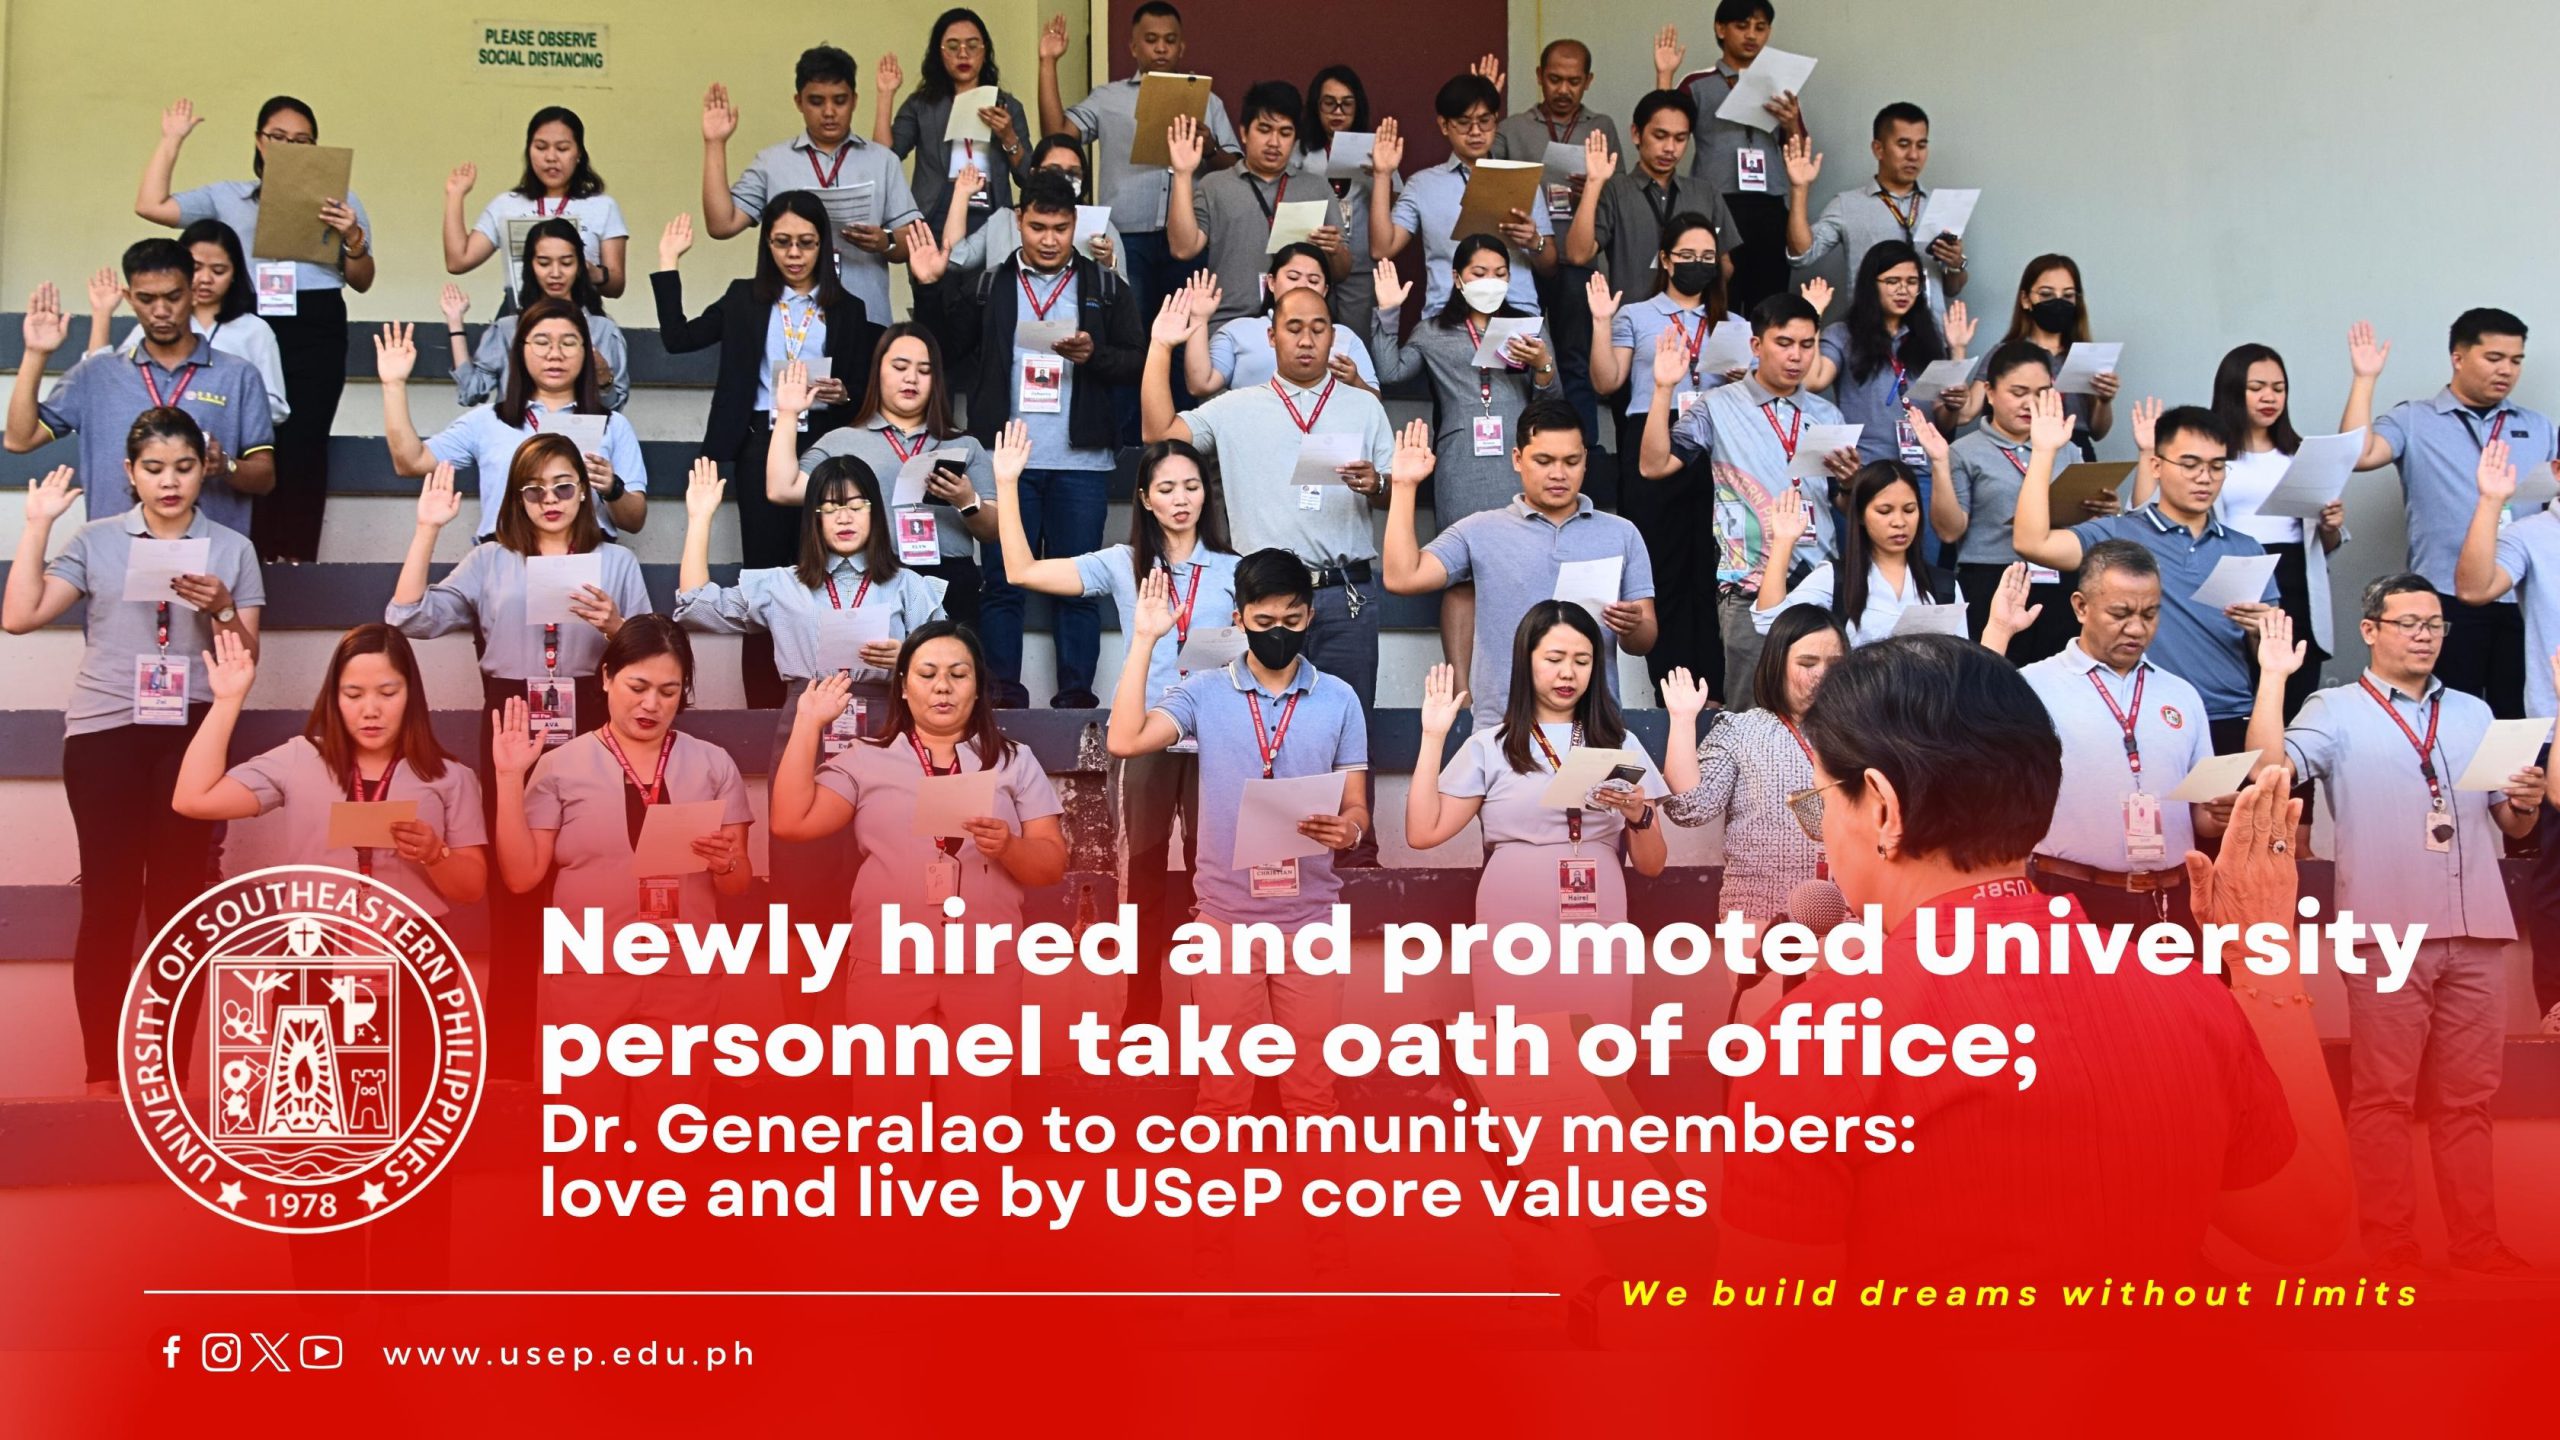 Newly hired and promoted University personnel take oath of office; Dr. Generalao to community members: love and live by USeP core values